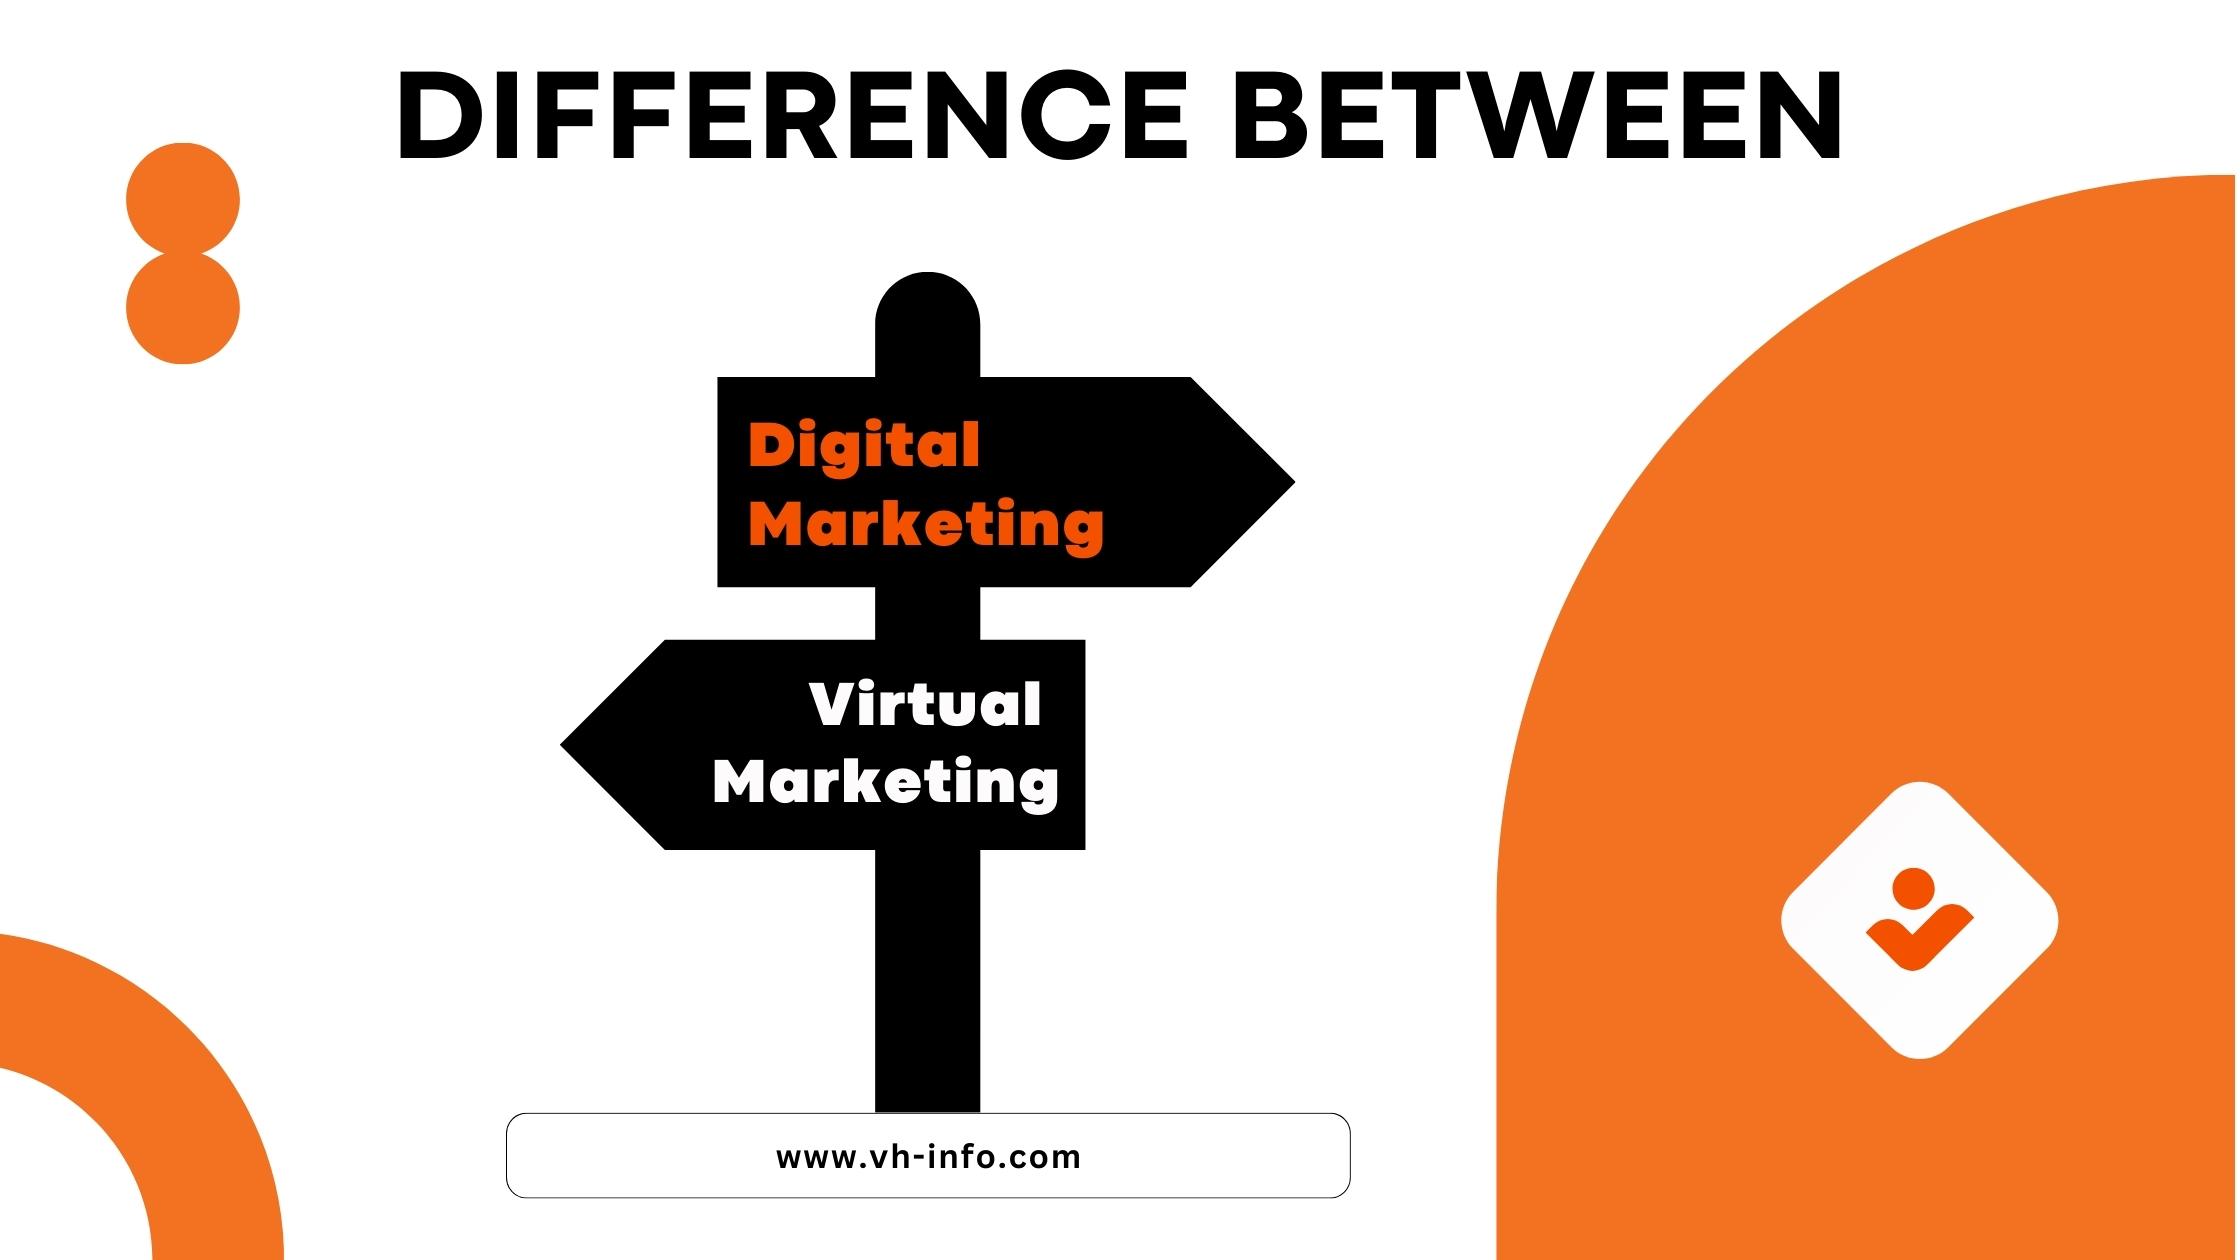 Difference between virtual and digital marketing